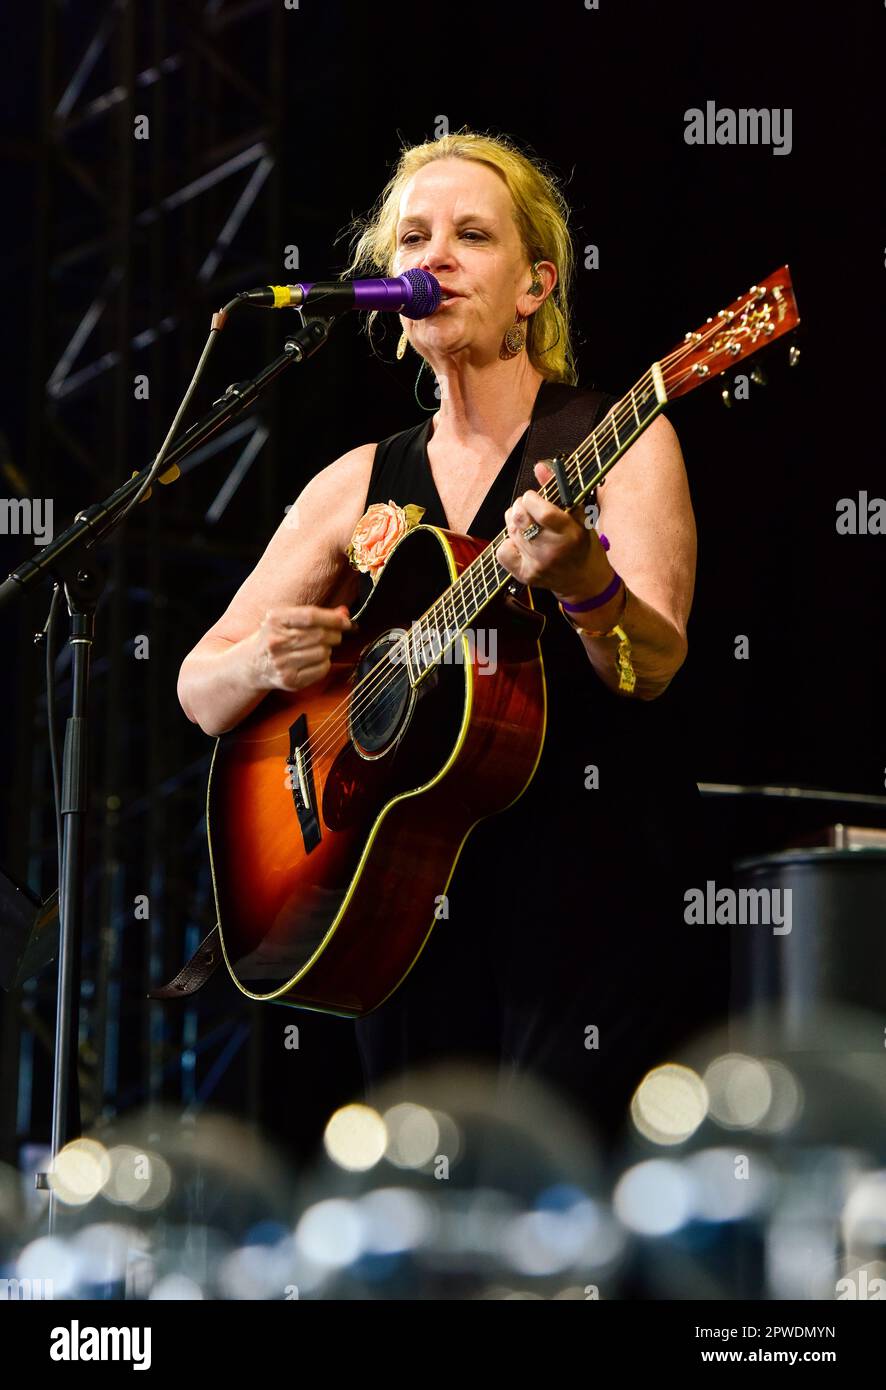 Indio, California, 29 April, 2023- Mary Chapin Carpenter Performing on stage at Stagecoach country music festival. Photo Credit: Ken Howard/ Alamy Live News Stock Photo